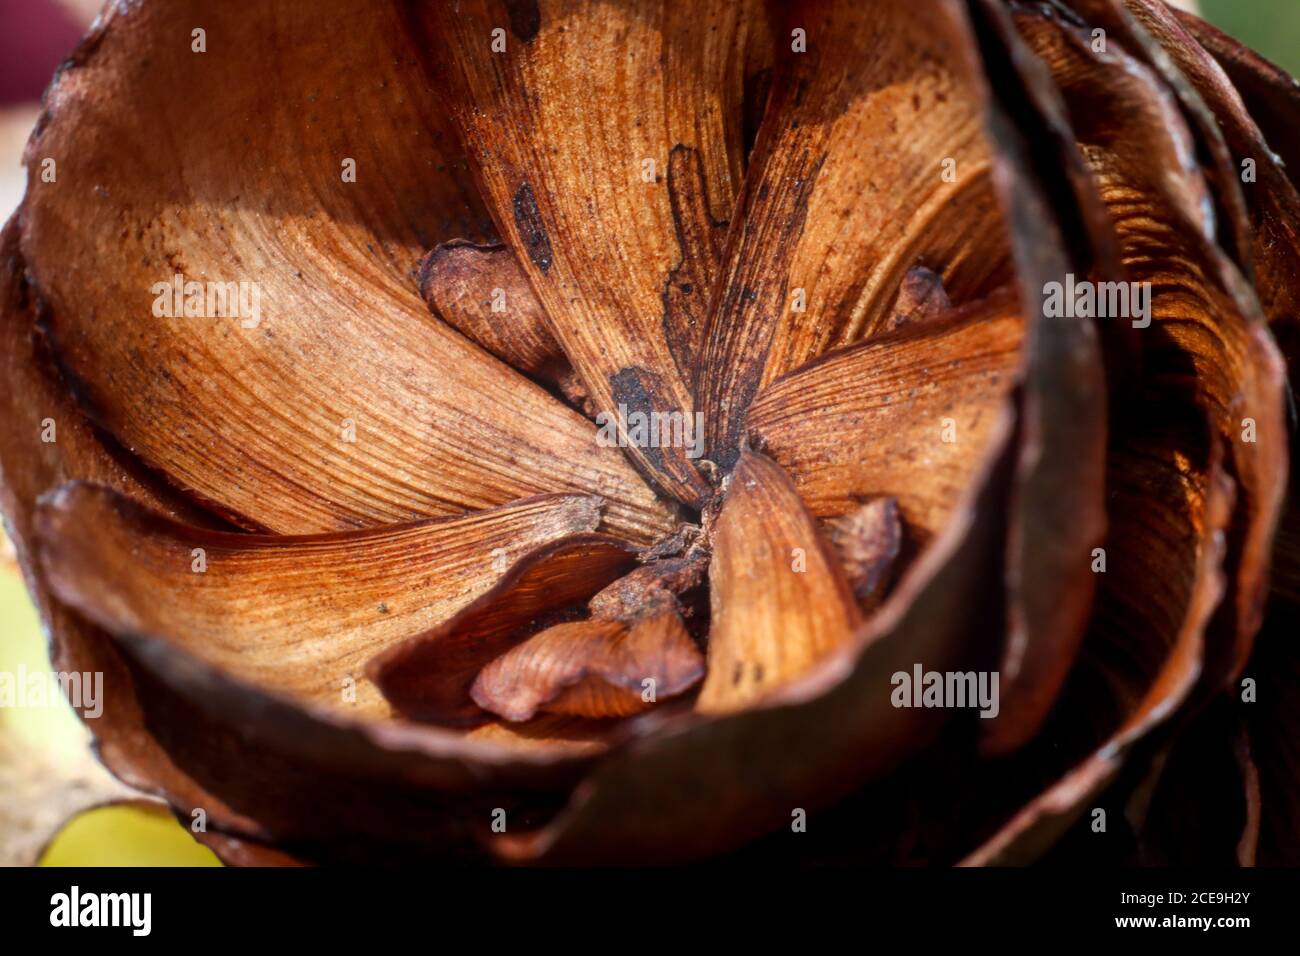 the inside of the pine cone is brown Stock Photo